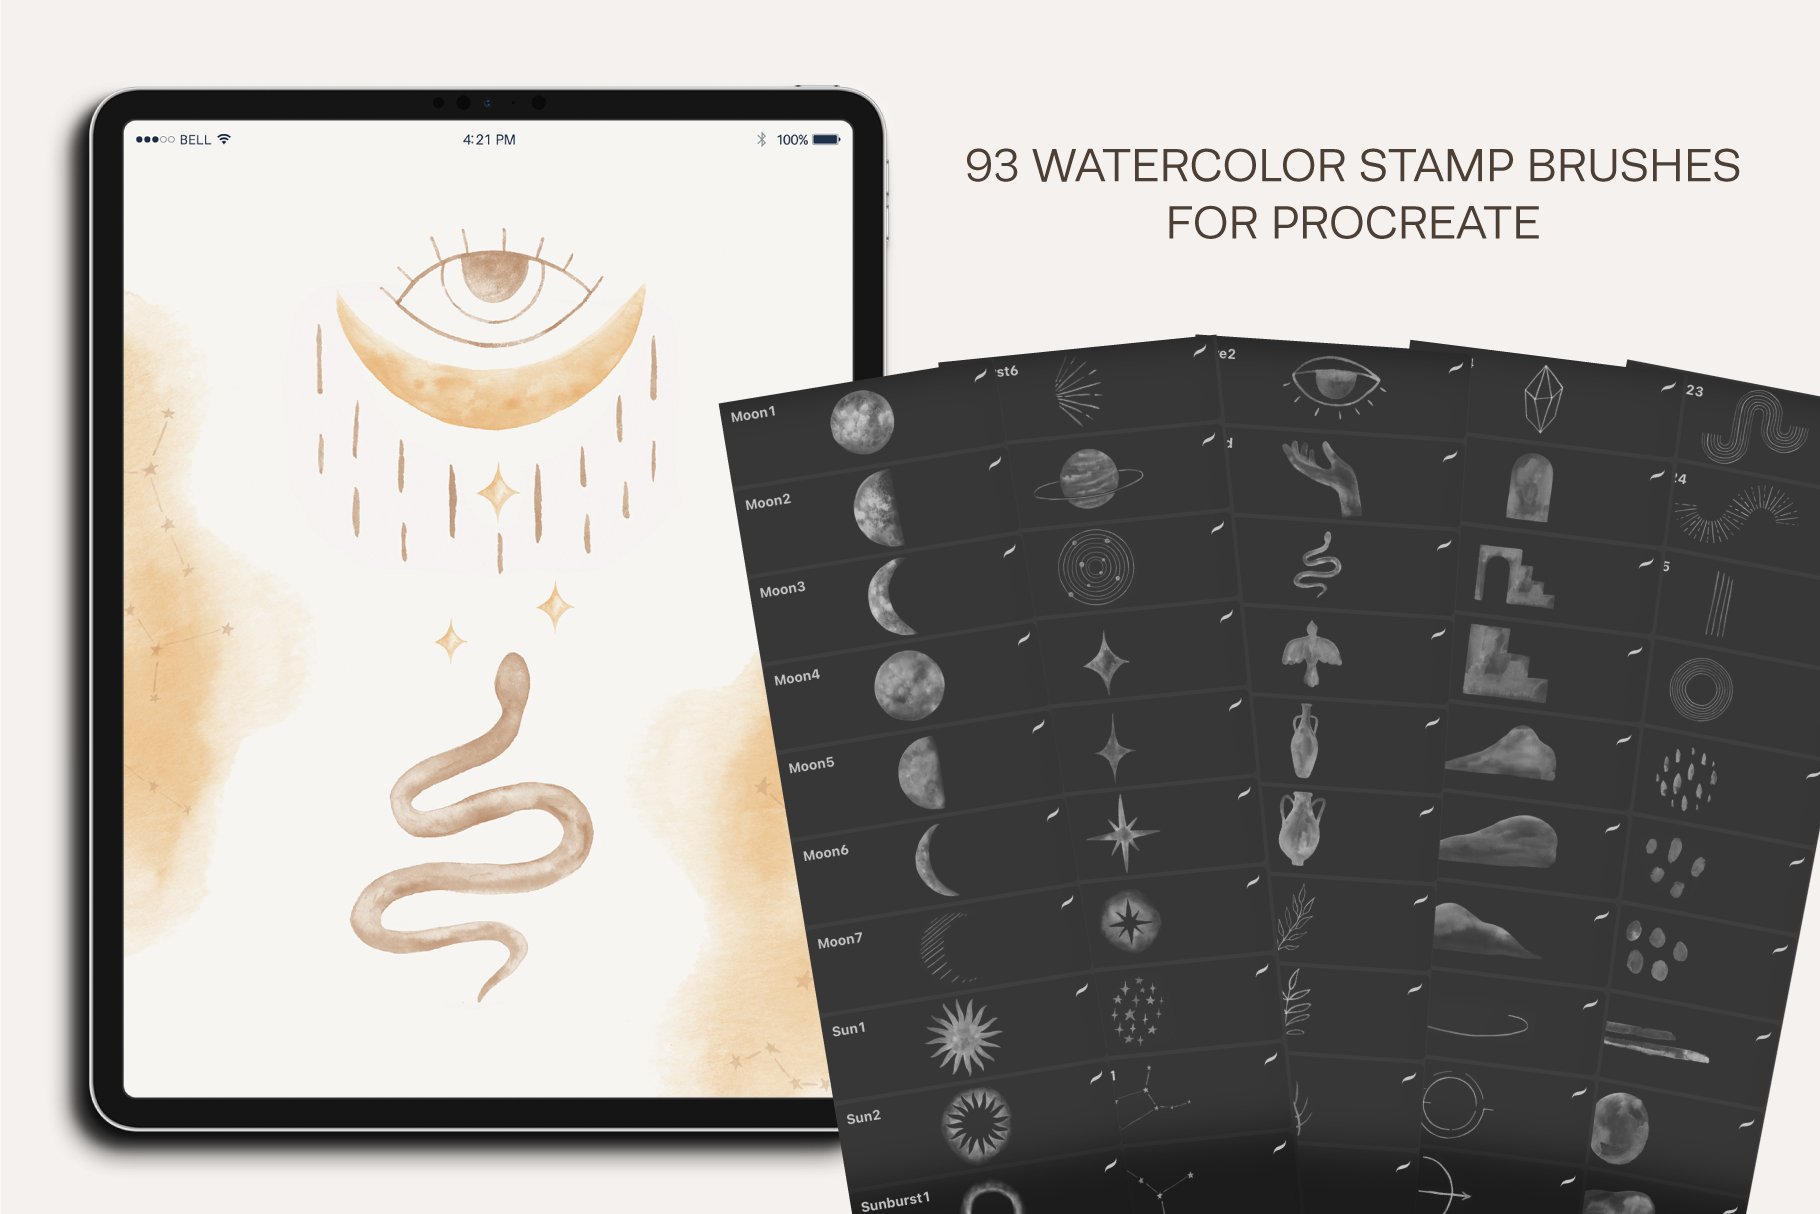 watercolor celestial stamp brushes5 791